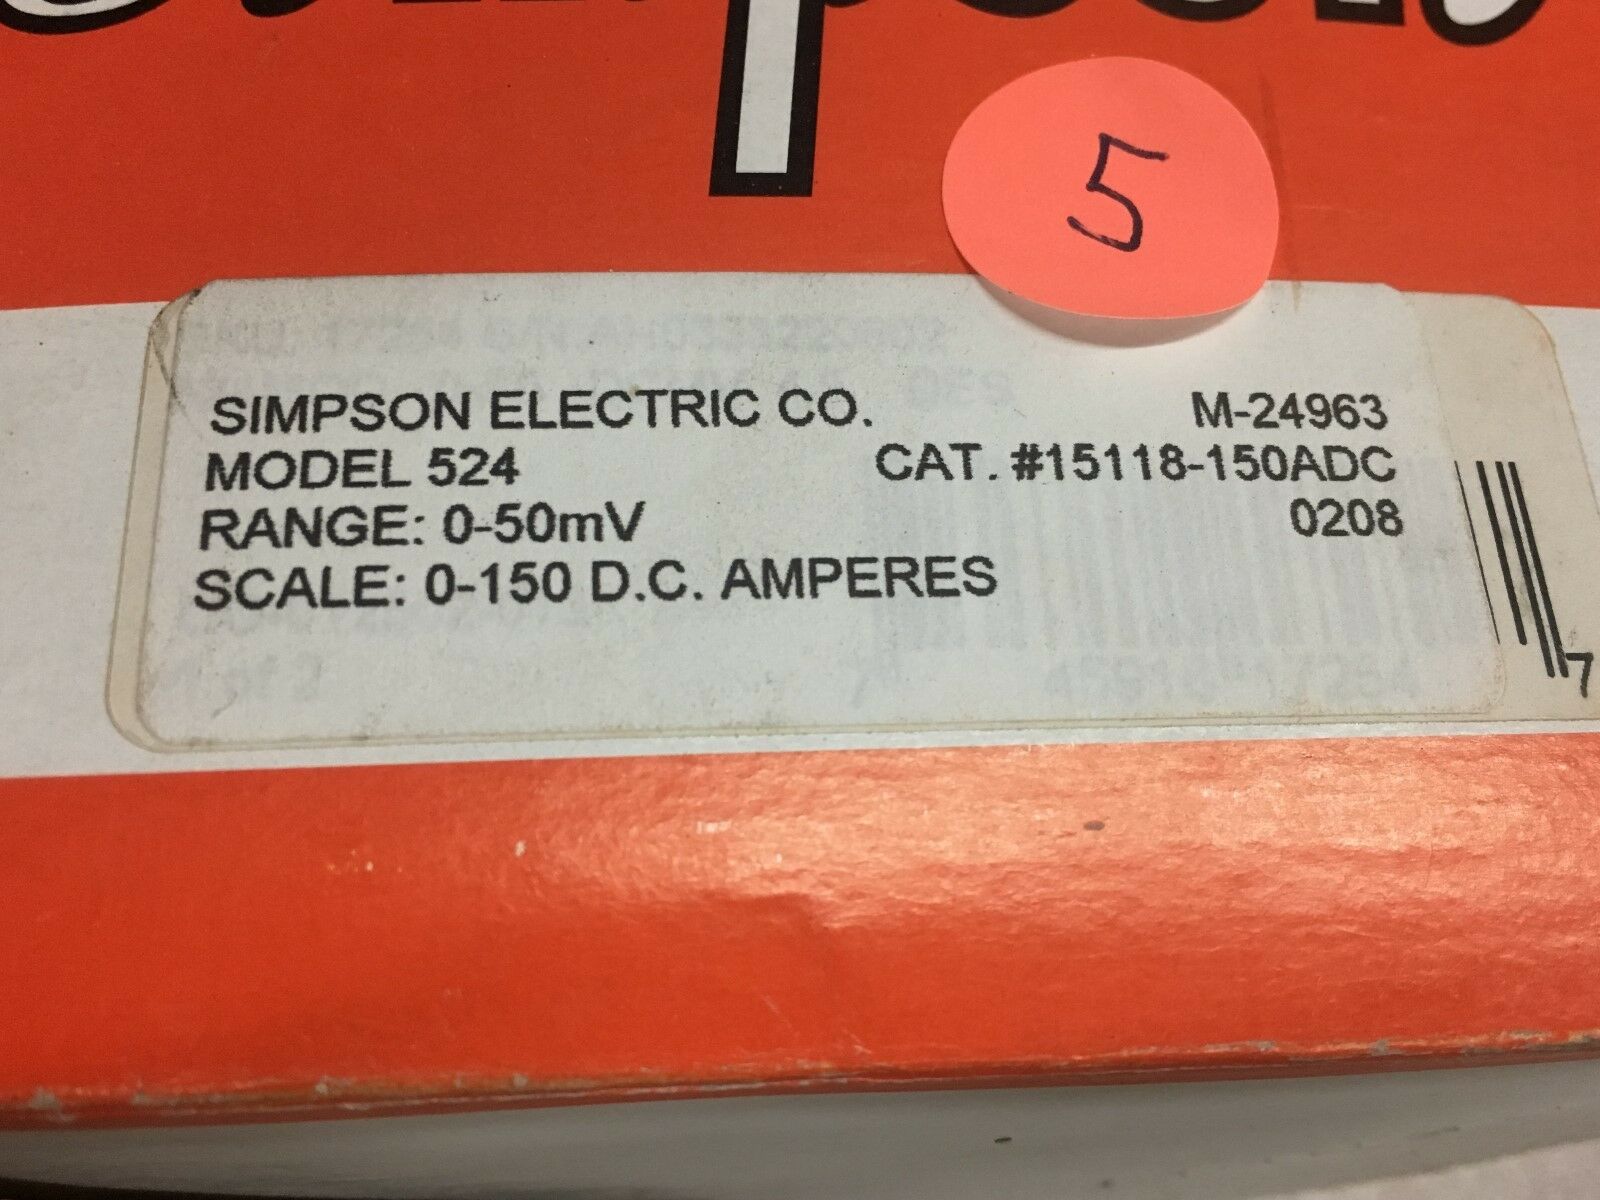 NEW IN BOX SIMPSONS PANEL METER 15118-150ADC